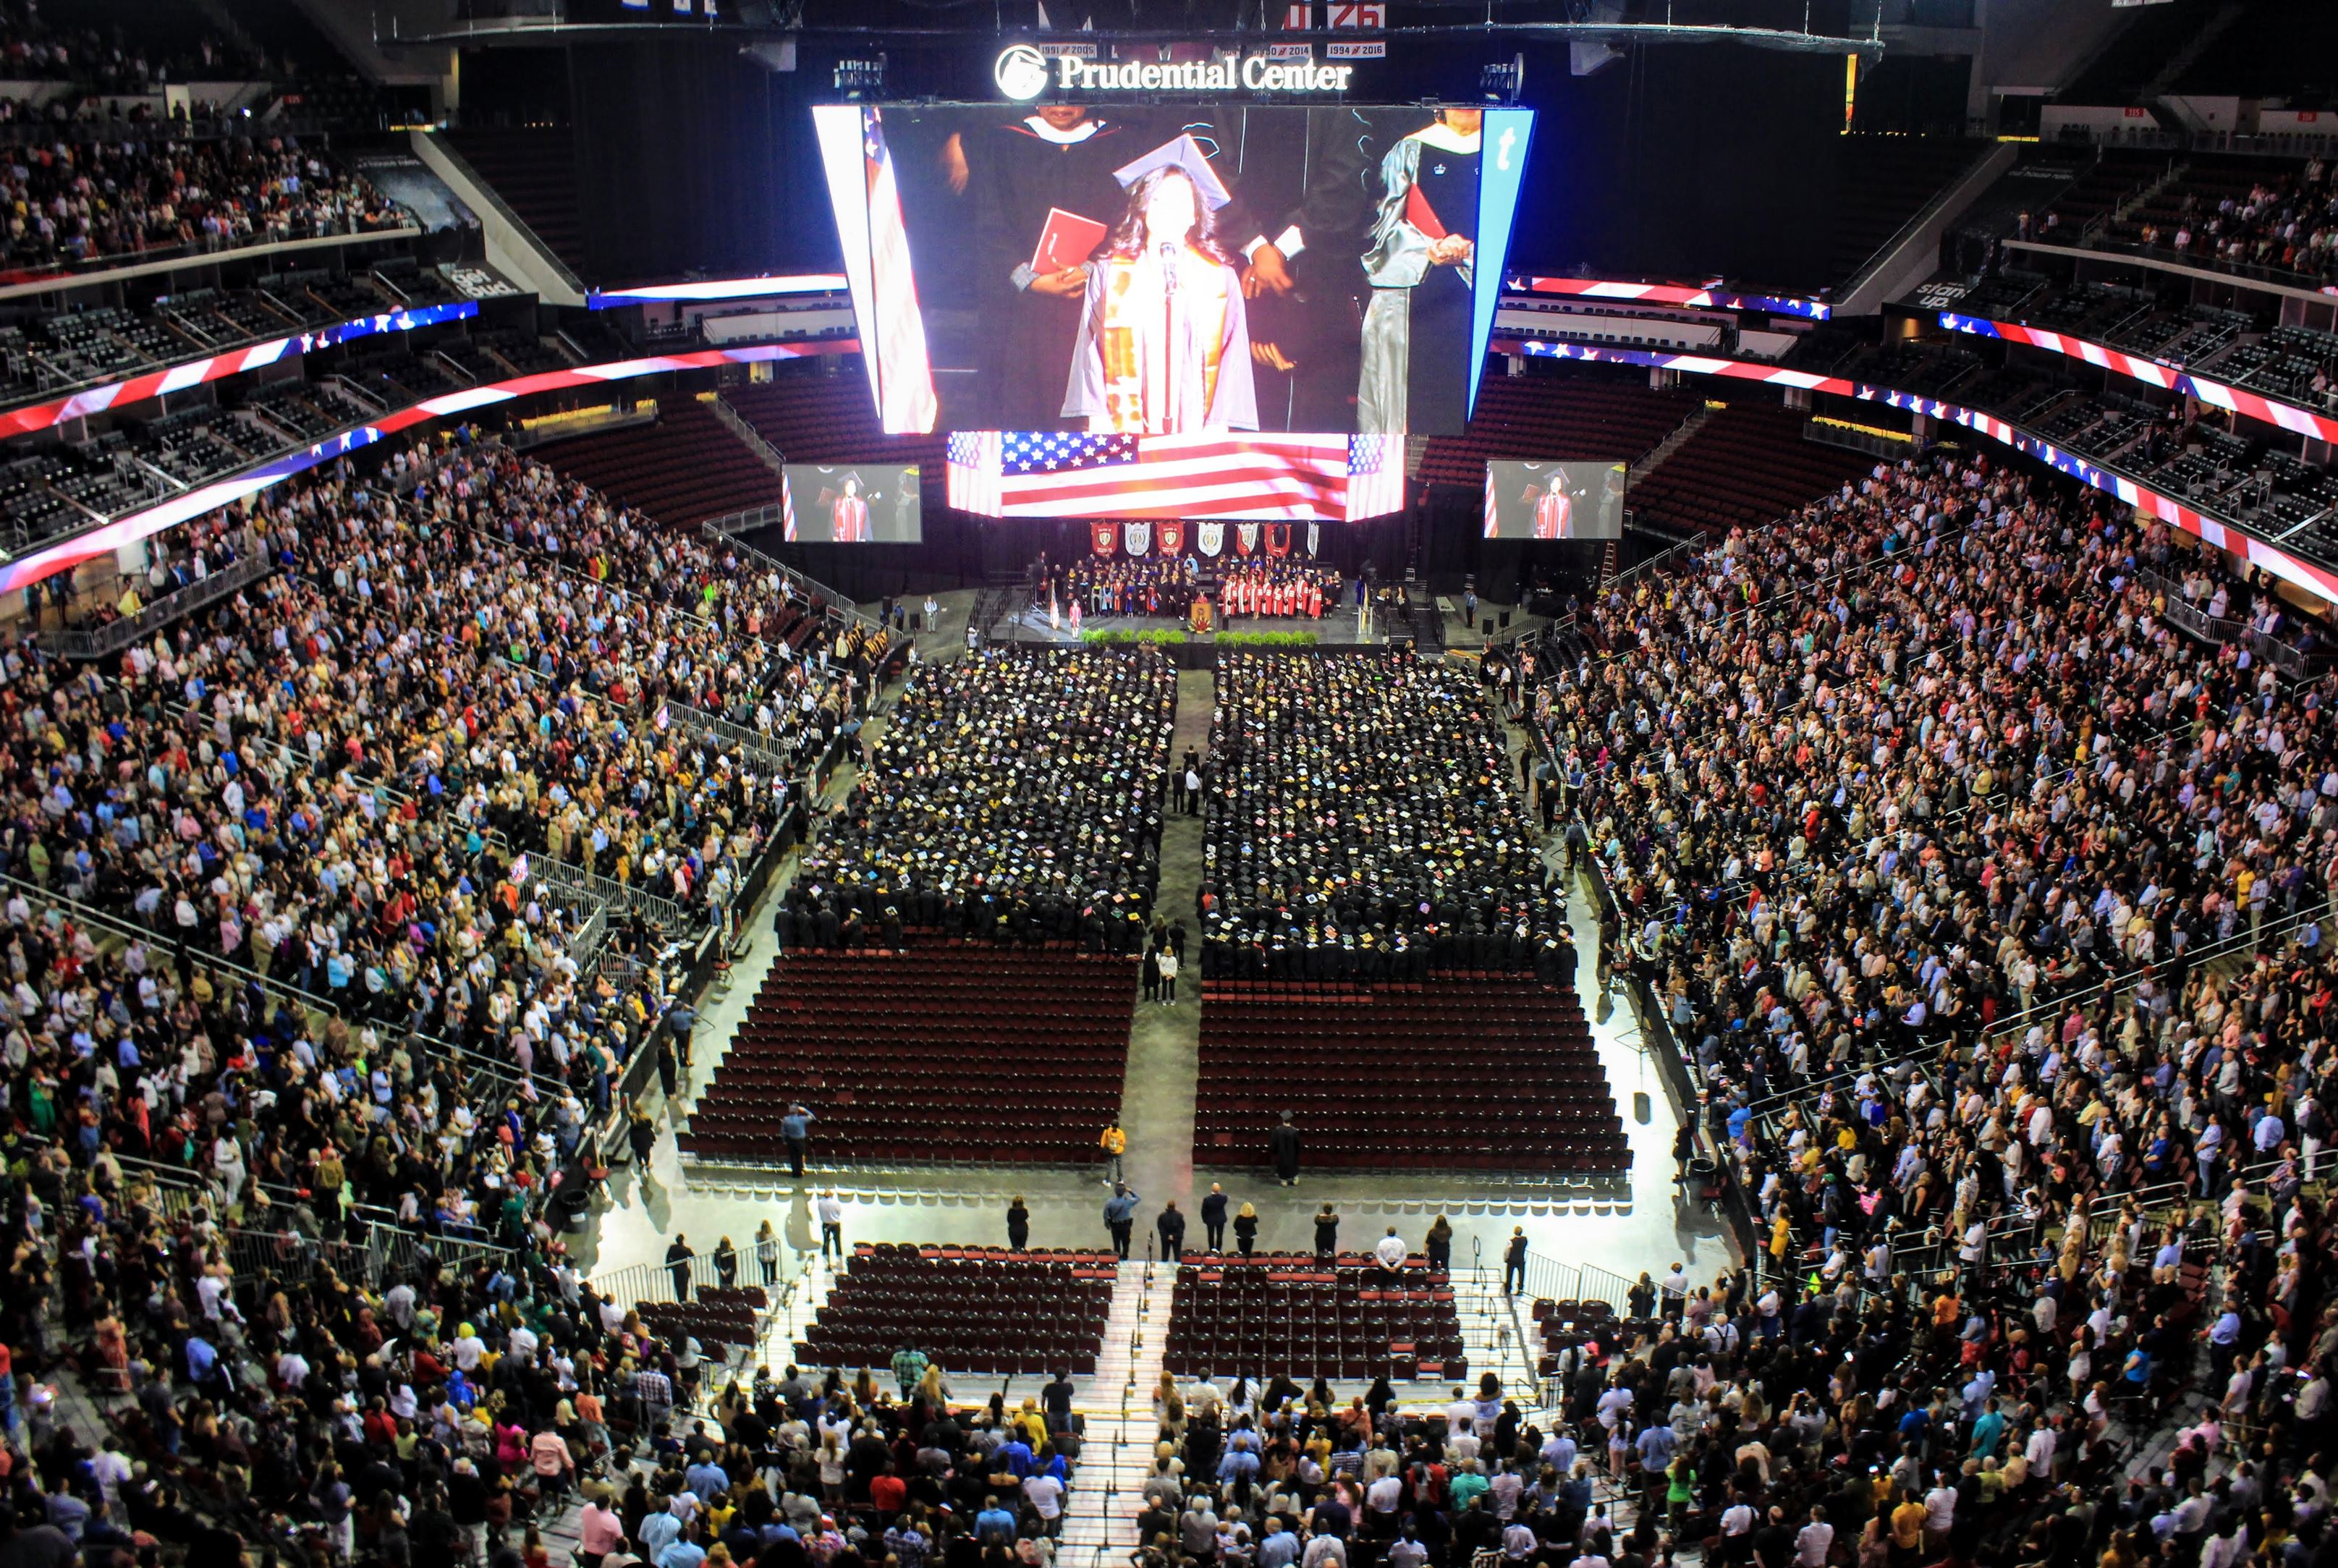 Unlike the 2019 commencement, this year's ceremony will not take place in the Prudential Center. Ben Caplan | The Montclarion